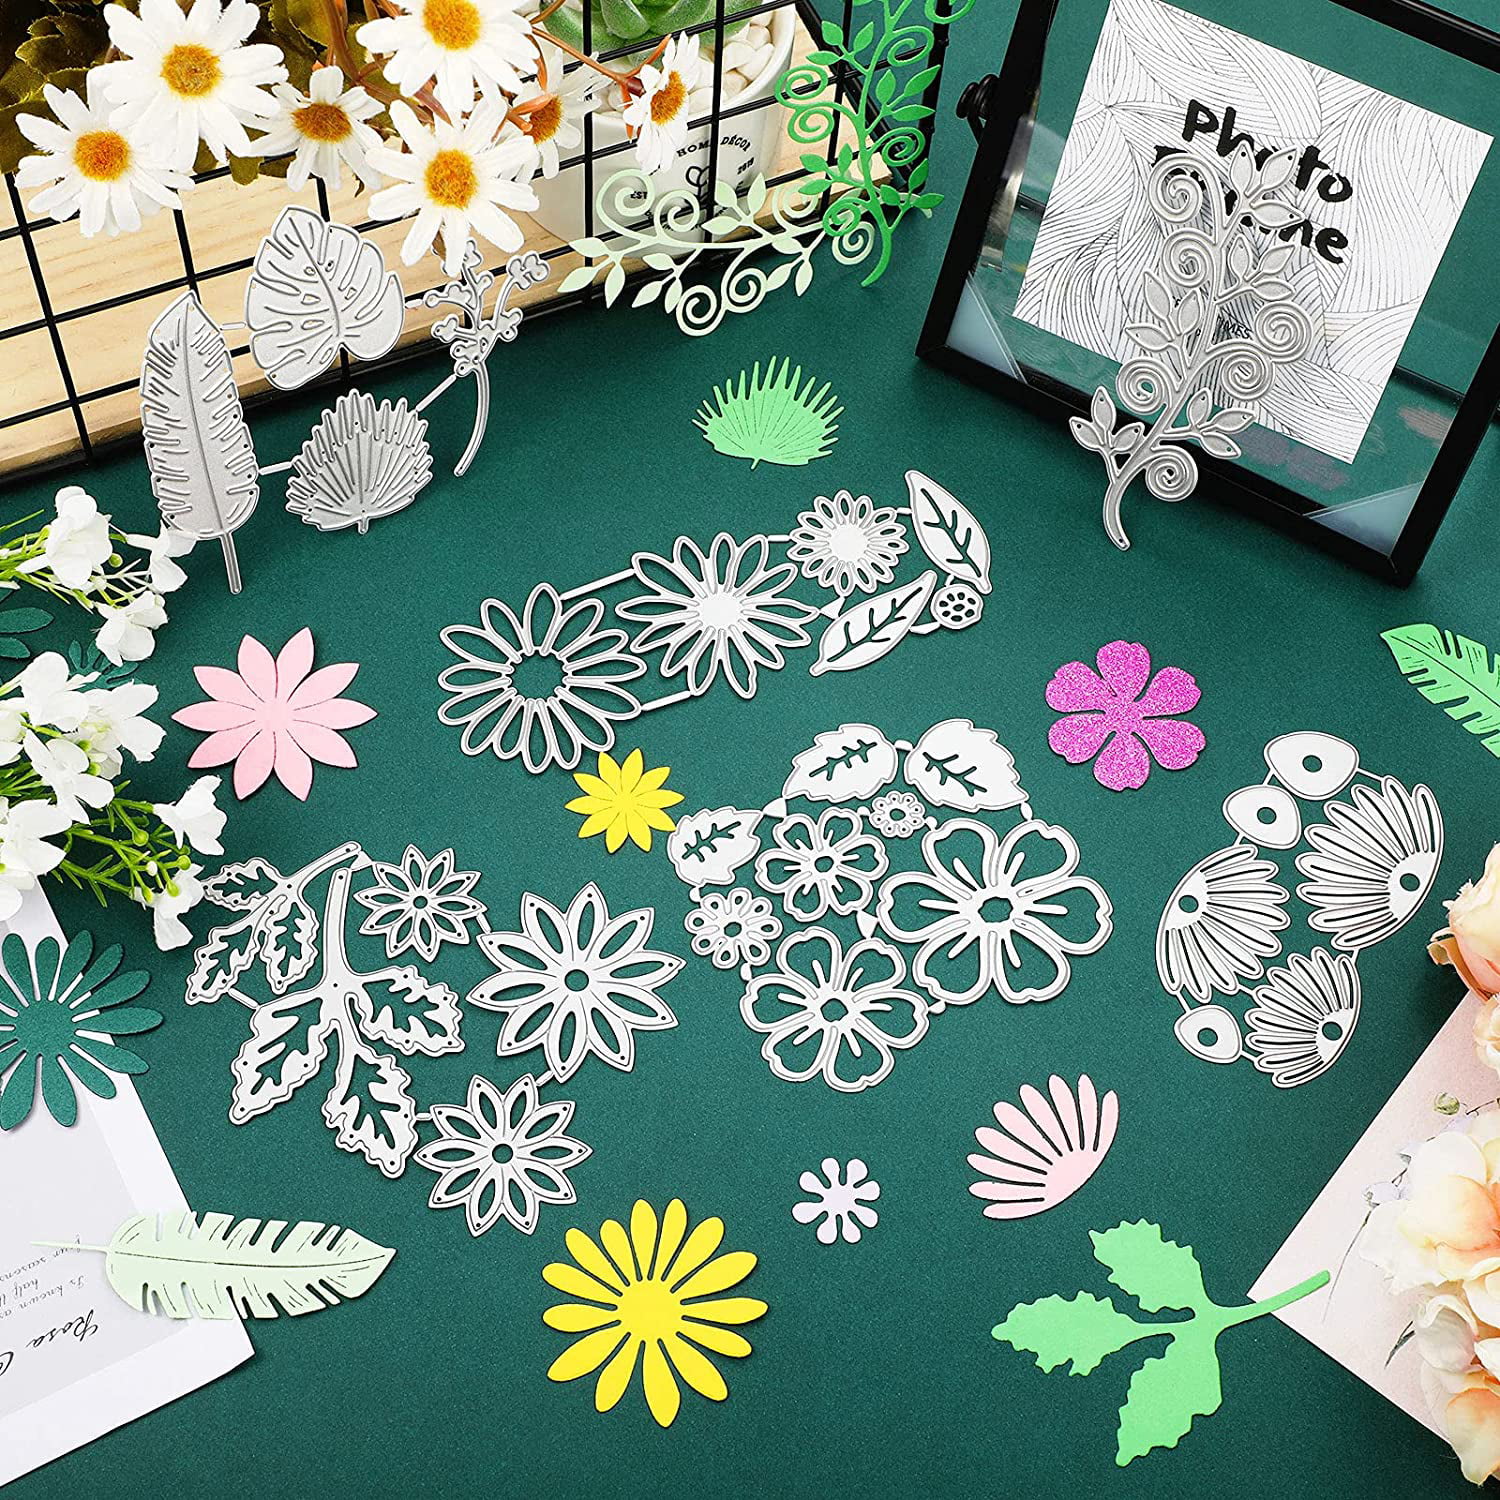 12 Pieces Dies Cutting for Flowers Die Cuts for Card Making Metal Leaves Cutting Dies Embossing Stencil for DIY Paper Crafts Scrapbook Album Cards 